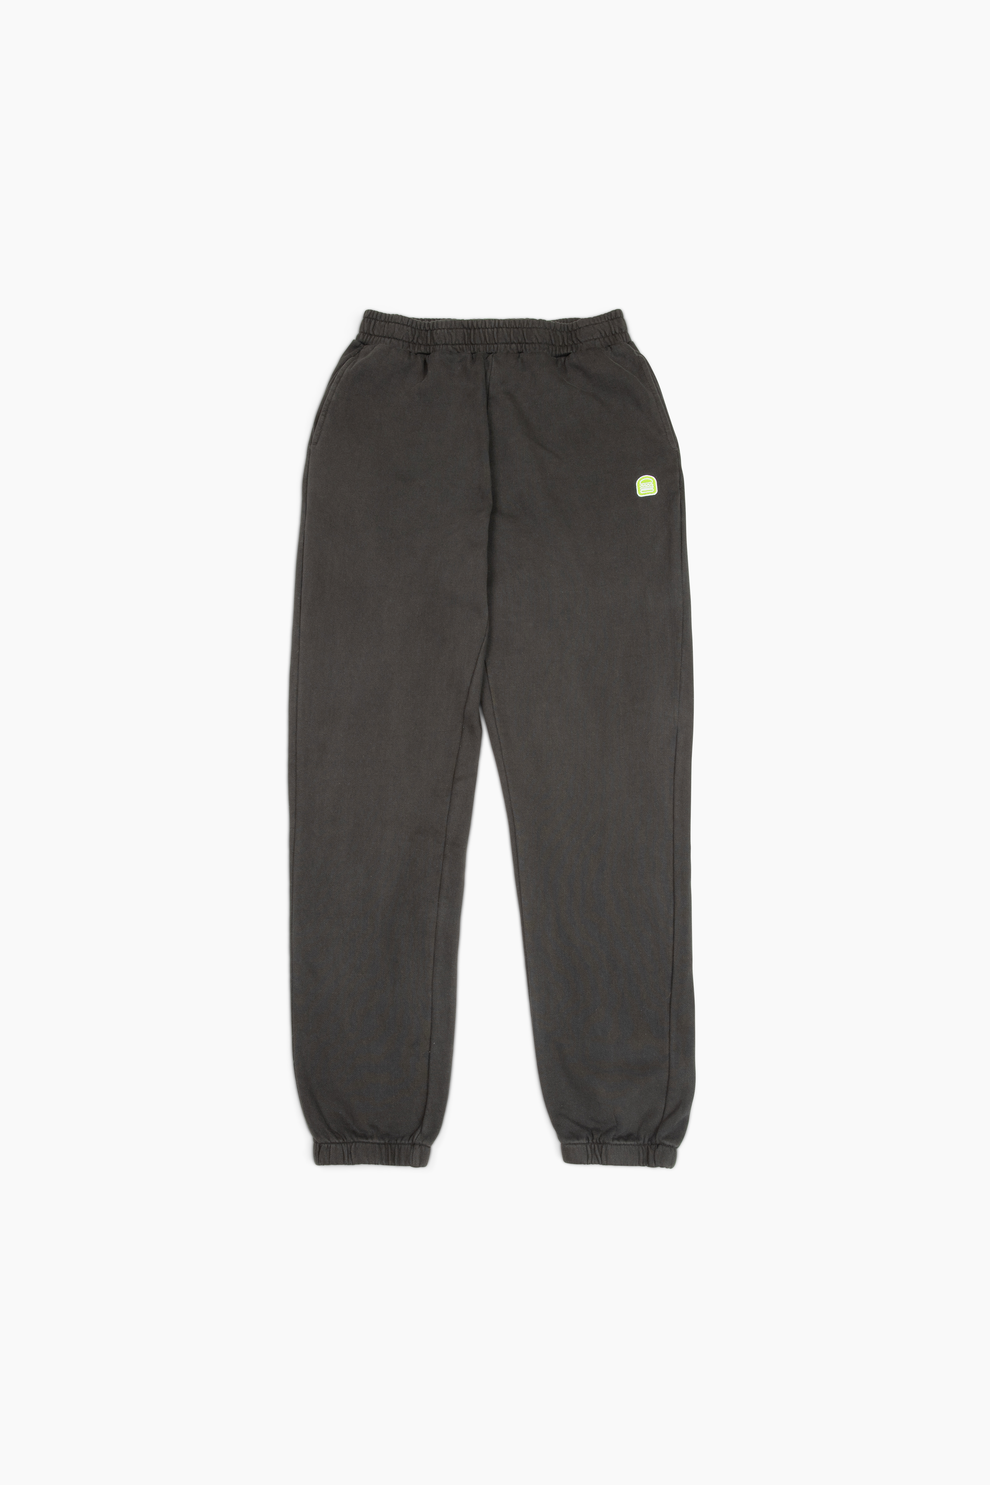 Black sweatpants with an embroidered Shake Shack logo on the left pant leg